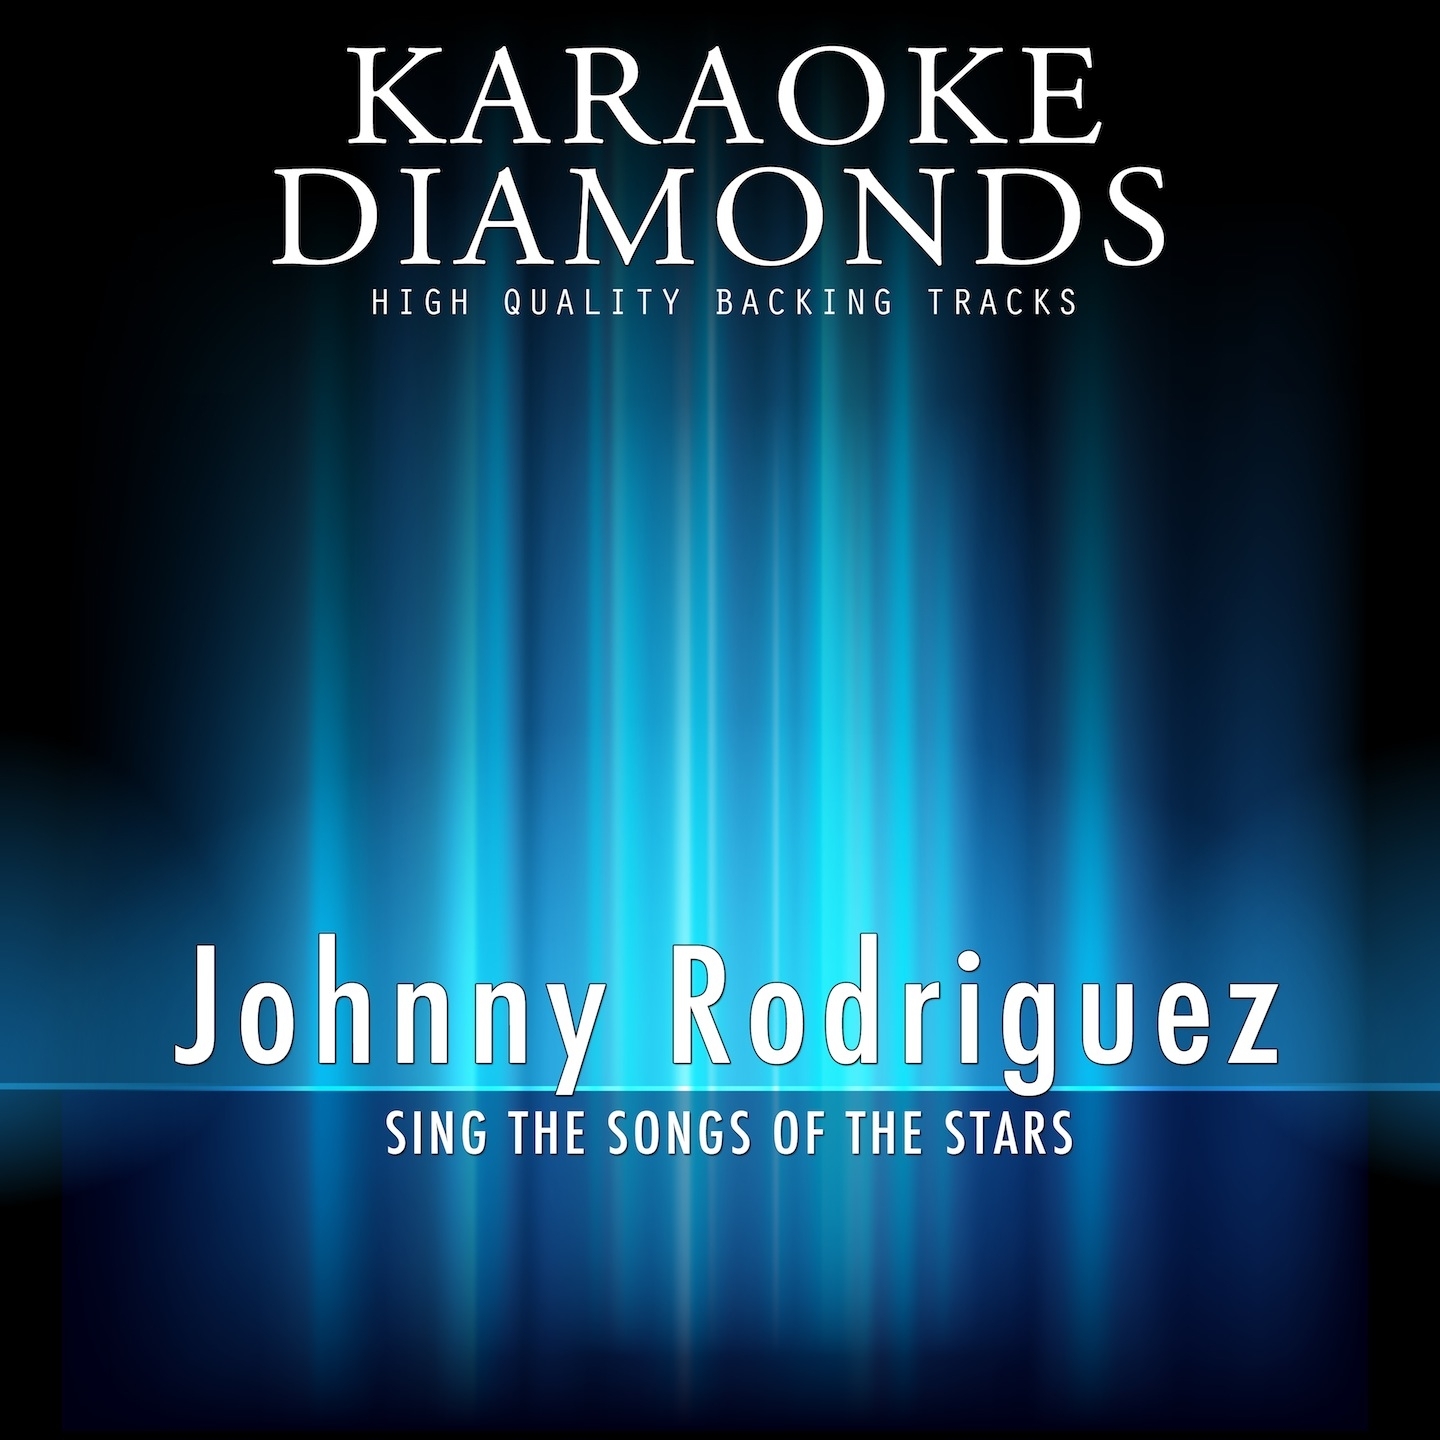 You Always Come Back (To Hurting Me) (Karaoke Version In the Style of Johnny Rodriguez)